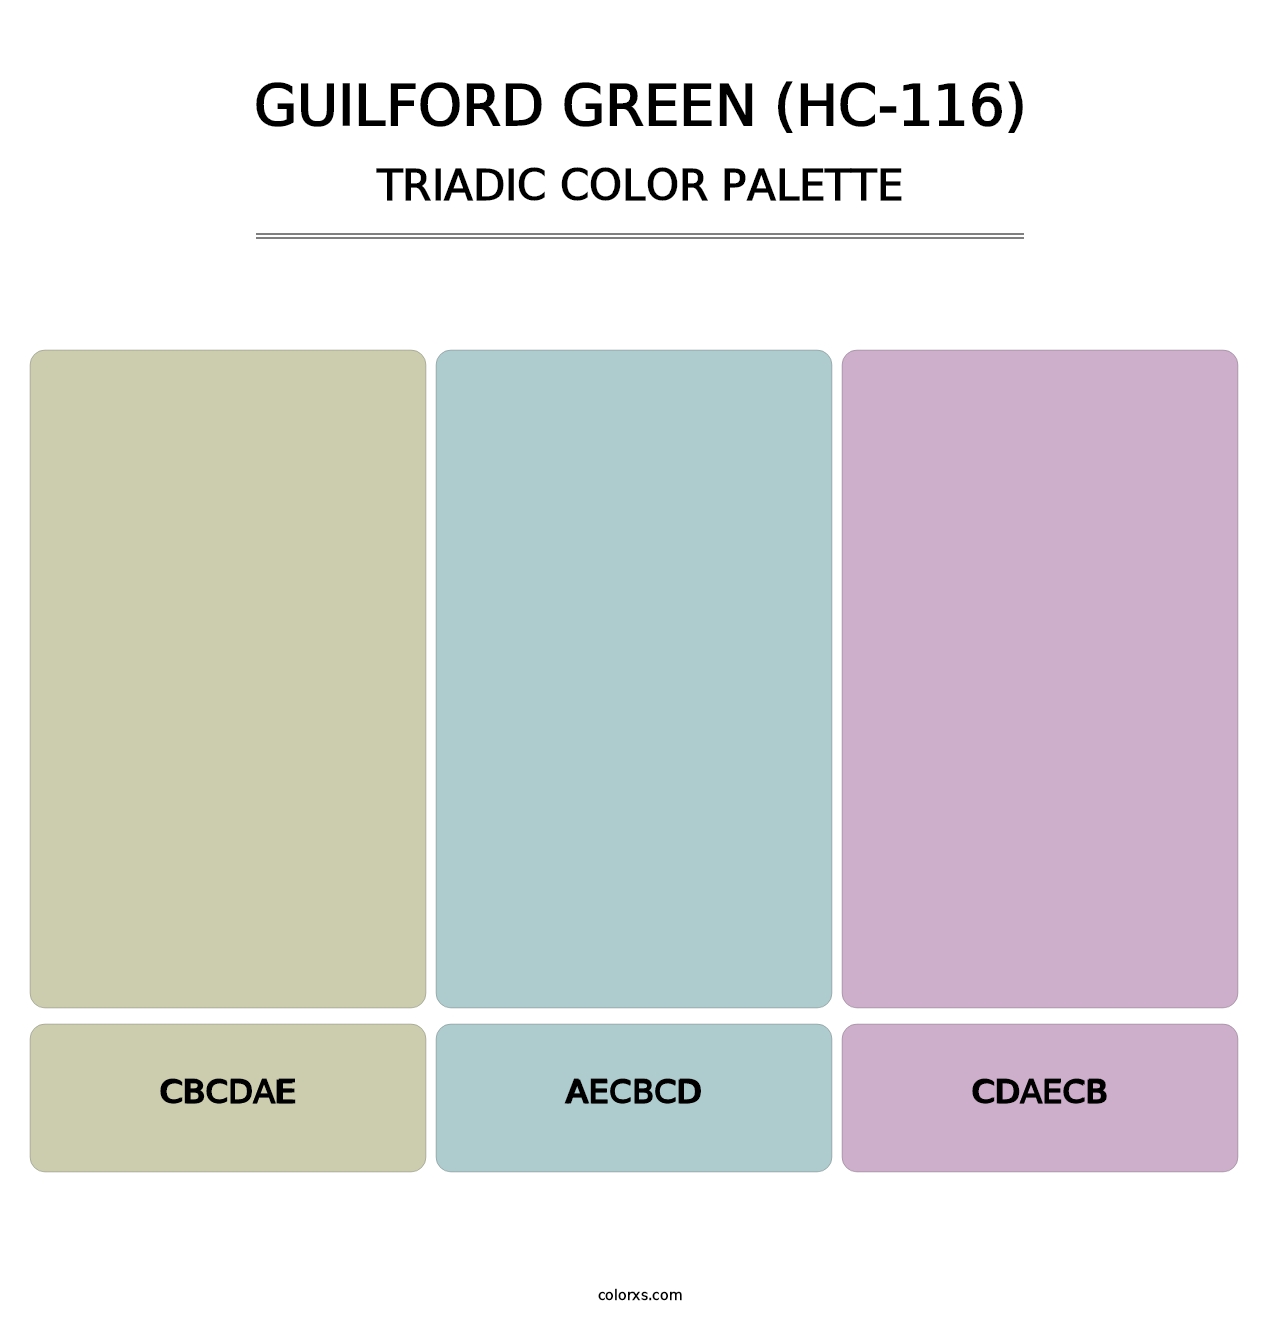 Guilford Green (HC-116) - Triadic Color Palette